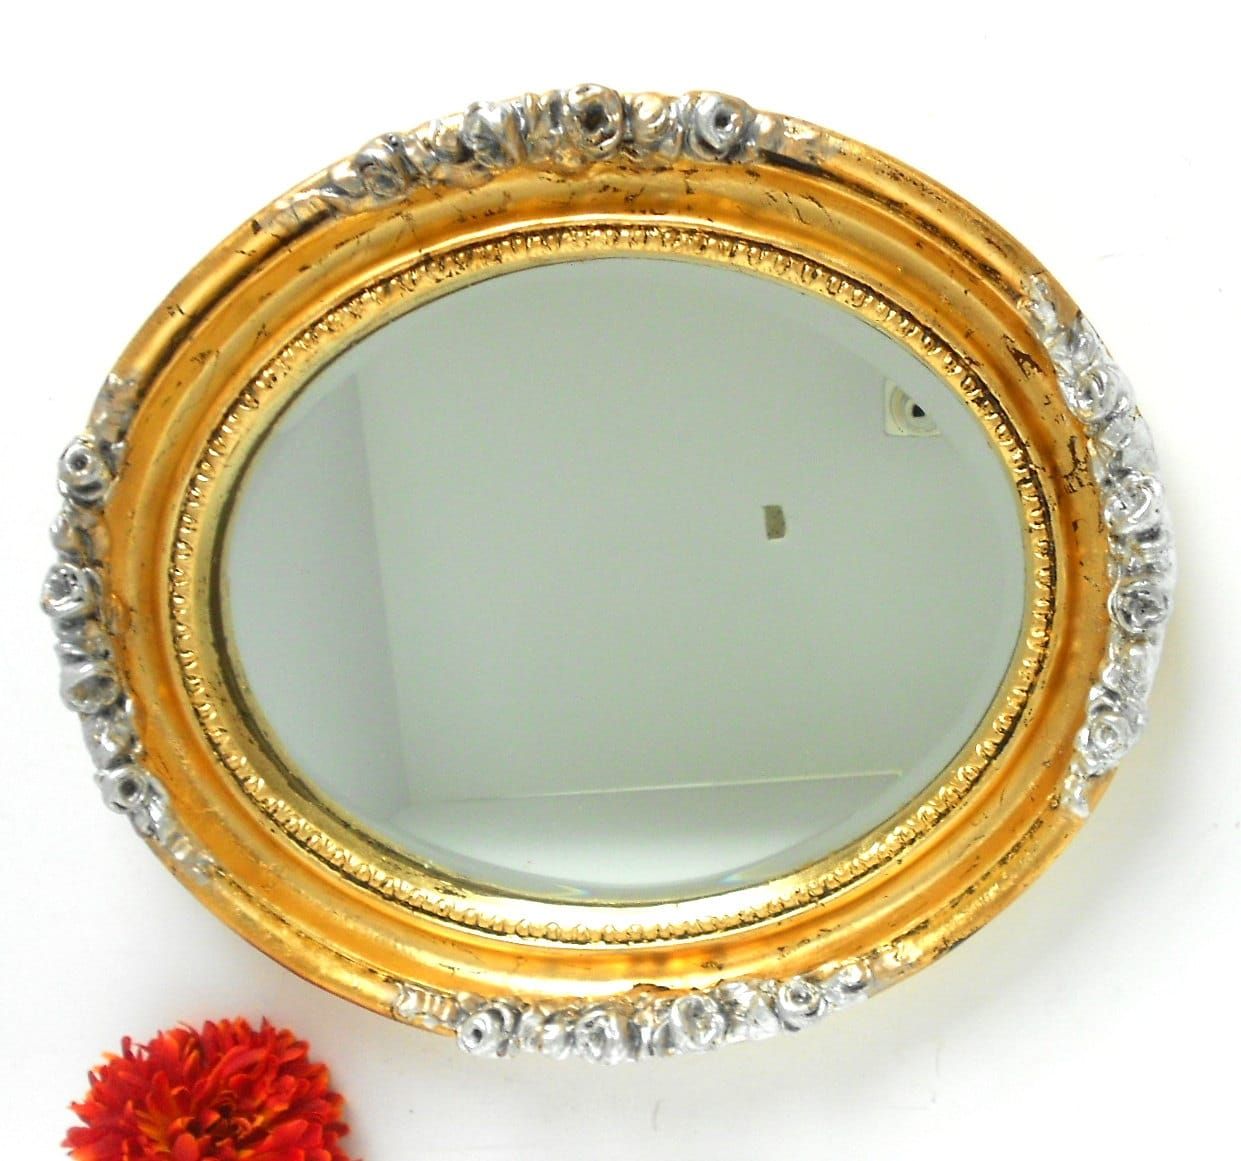 Mirror Large Oval Mirror Gold Mirror Oval Wall Mirror Pertaining To Oval Wide Lip Wall Mirrors (View 13 of 15)